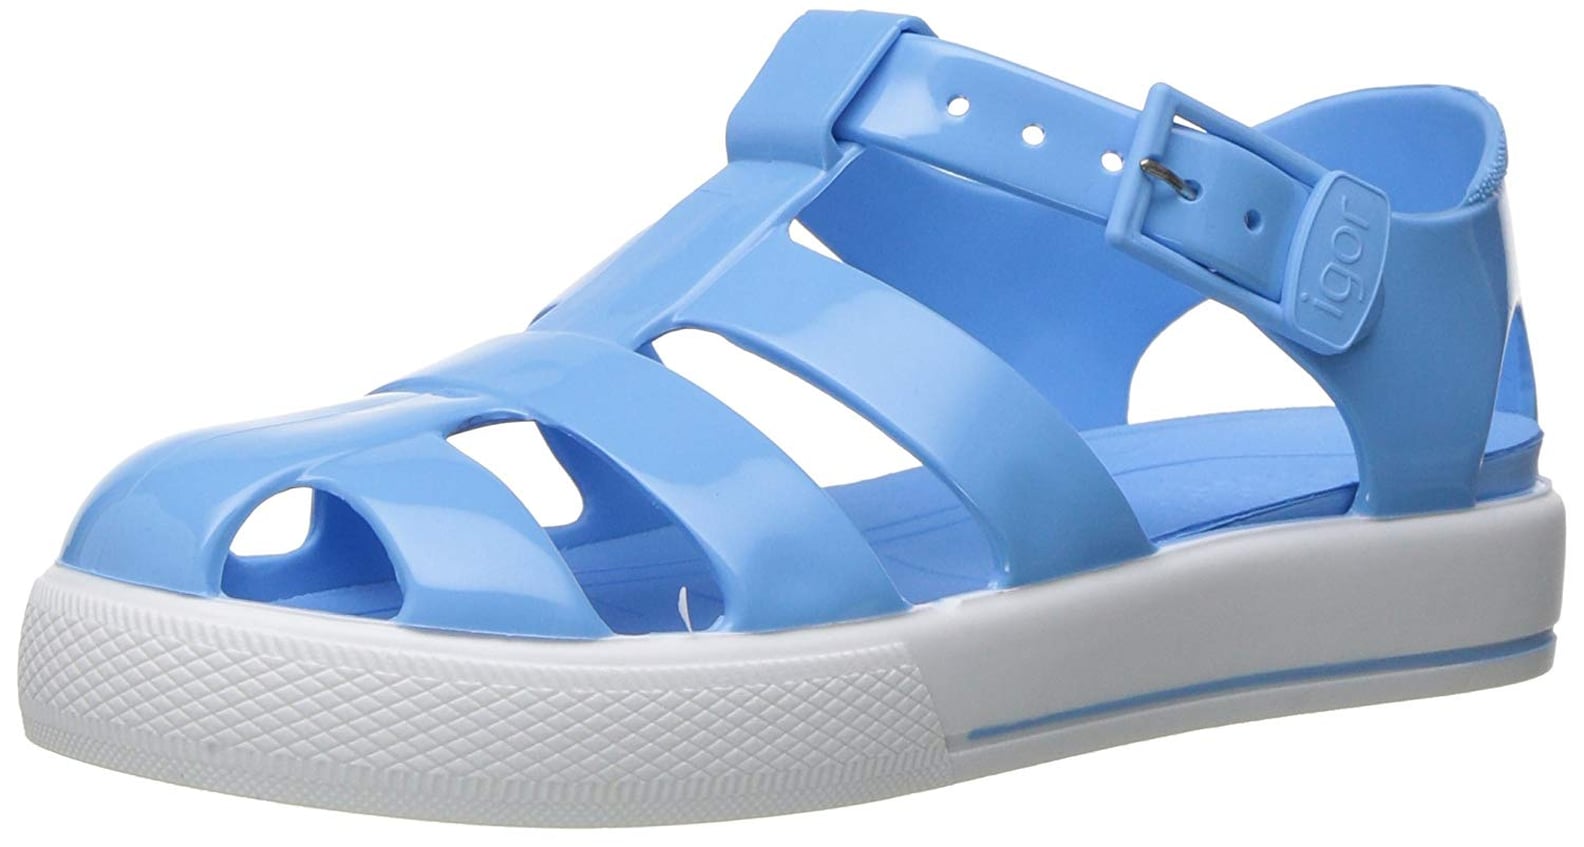 Closed-Toe Sandals For Toddler Girls and Boys | POPSUGAR Family